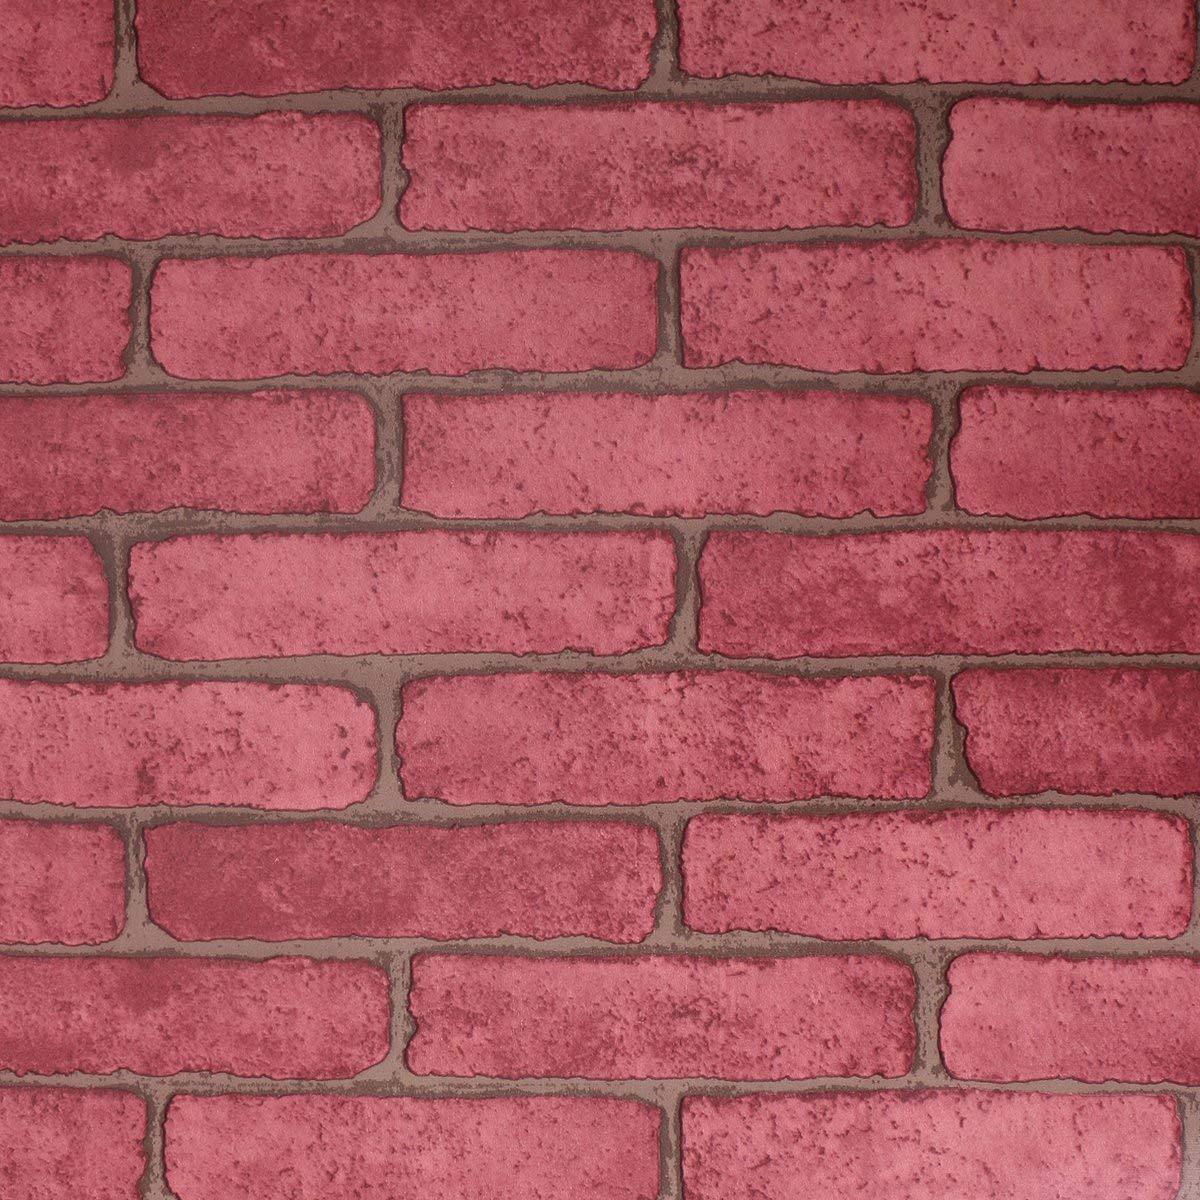 RED BRICKS WALLPAPER Self-adhesive Wallpaper Waterproof Pvc With Glue Wall  Stickers Renovation Background Sticker For Home Bedroom Living Room ICONIC  RED BRICKS STONE | Lazada PH